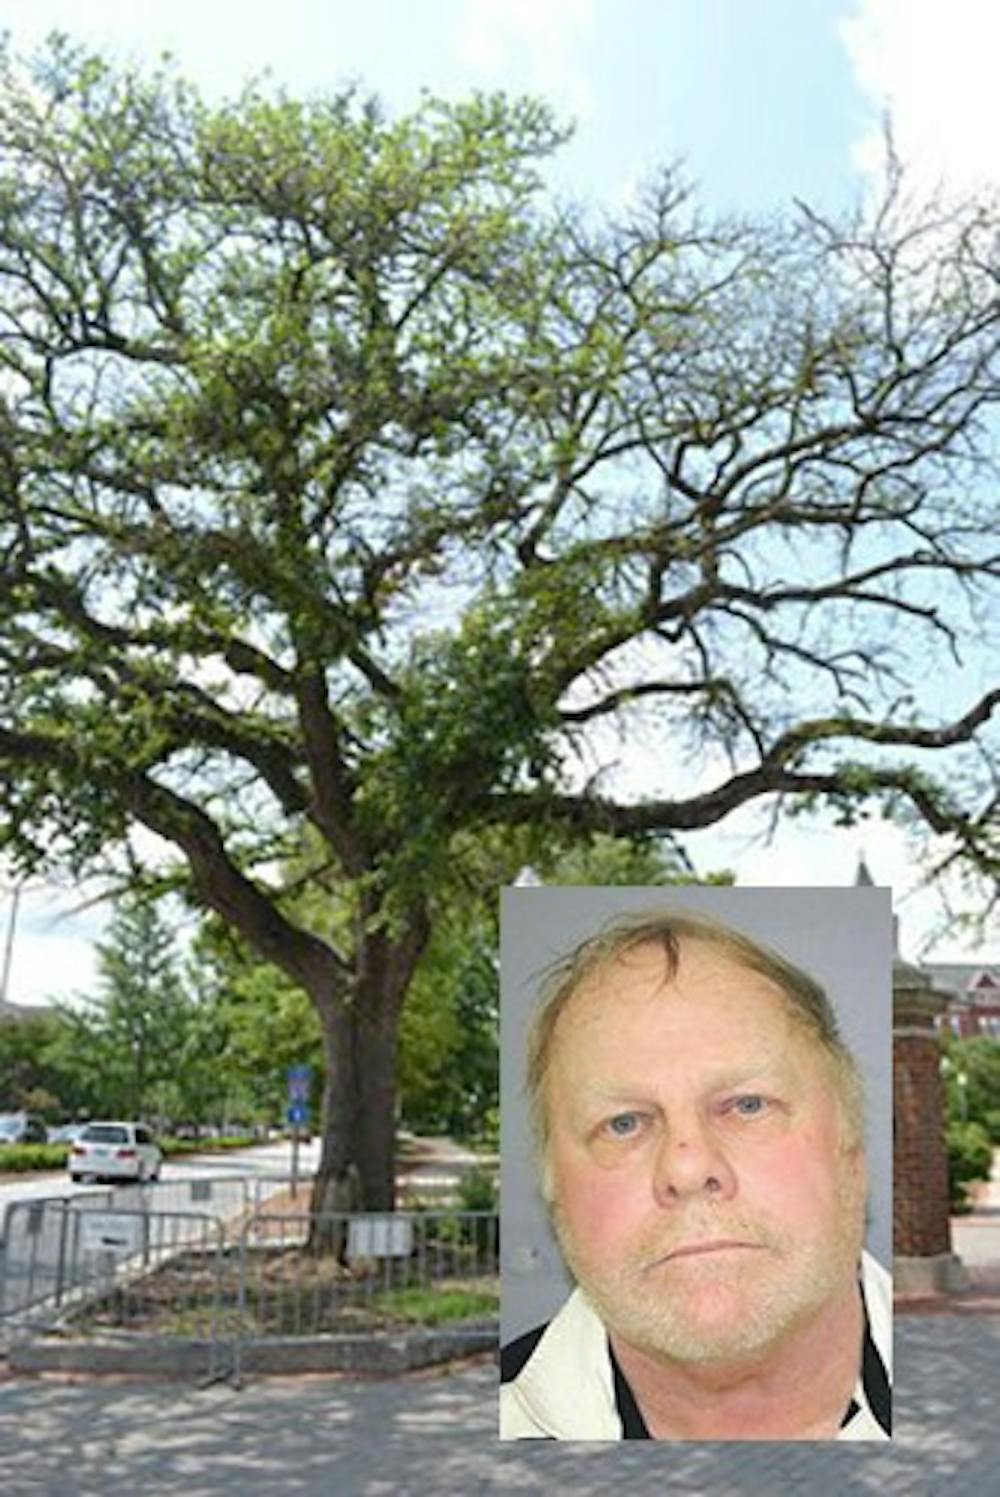 The Toomer's Oaks in 2012. Harvey Updyke, pictured right, pled guilty to poisoning the trees in 2013. 